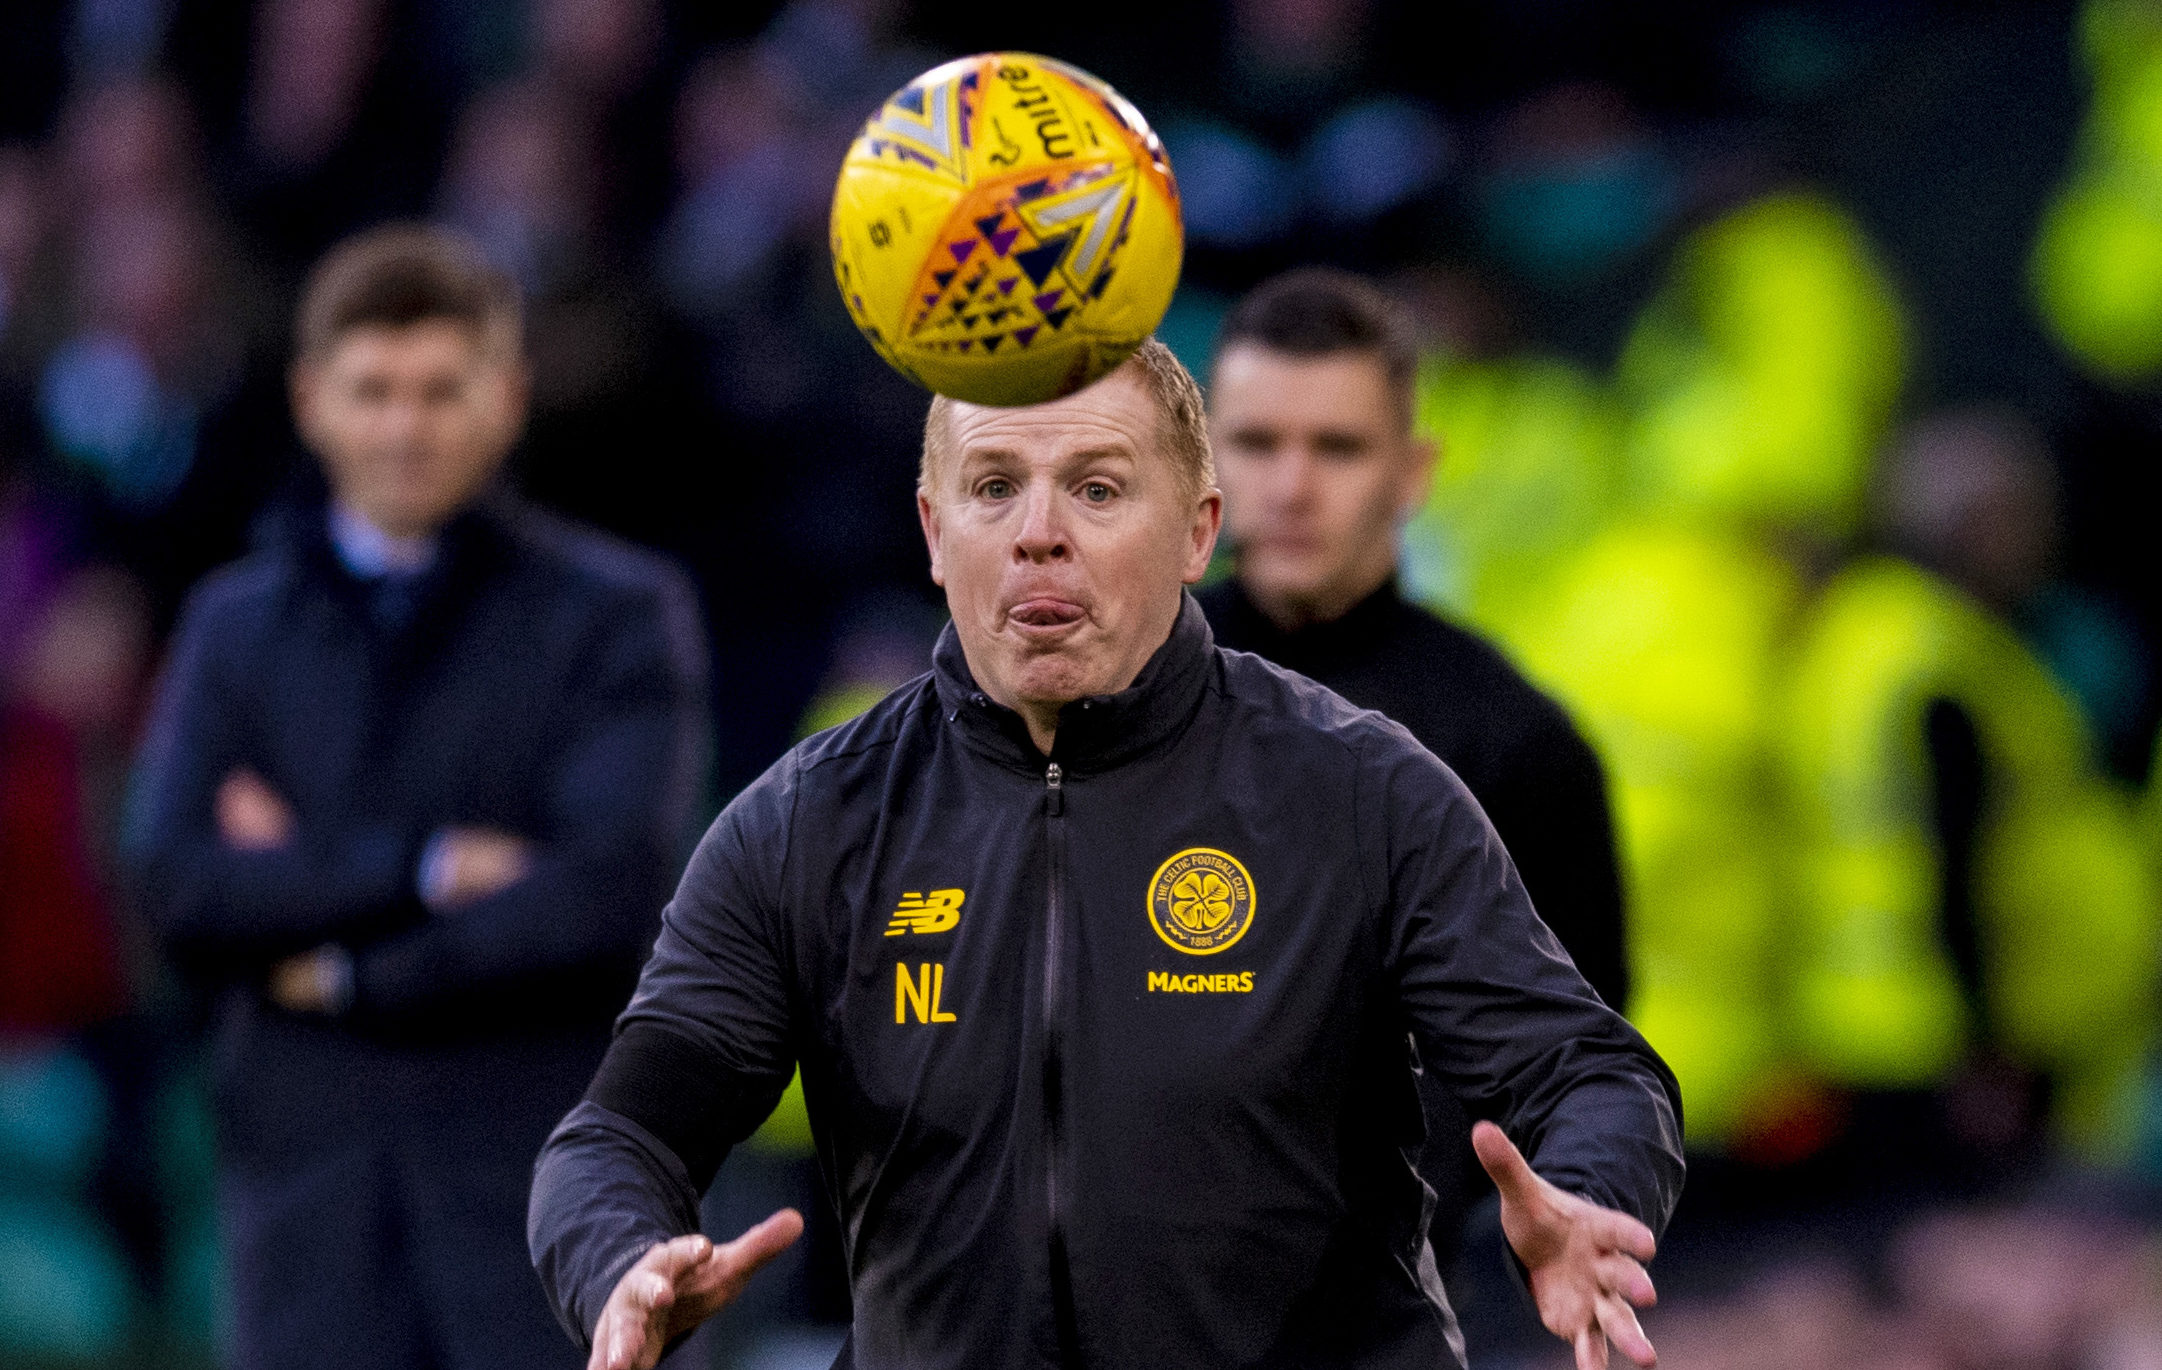 Celtic manager Neil Lennon has his eyes on the prize